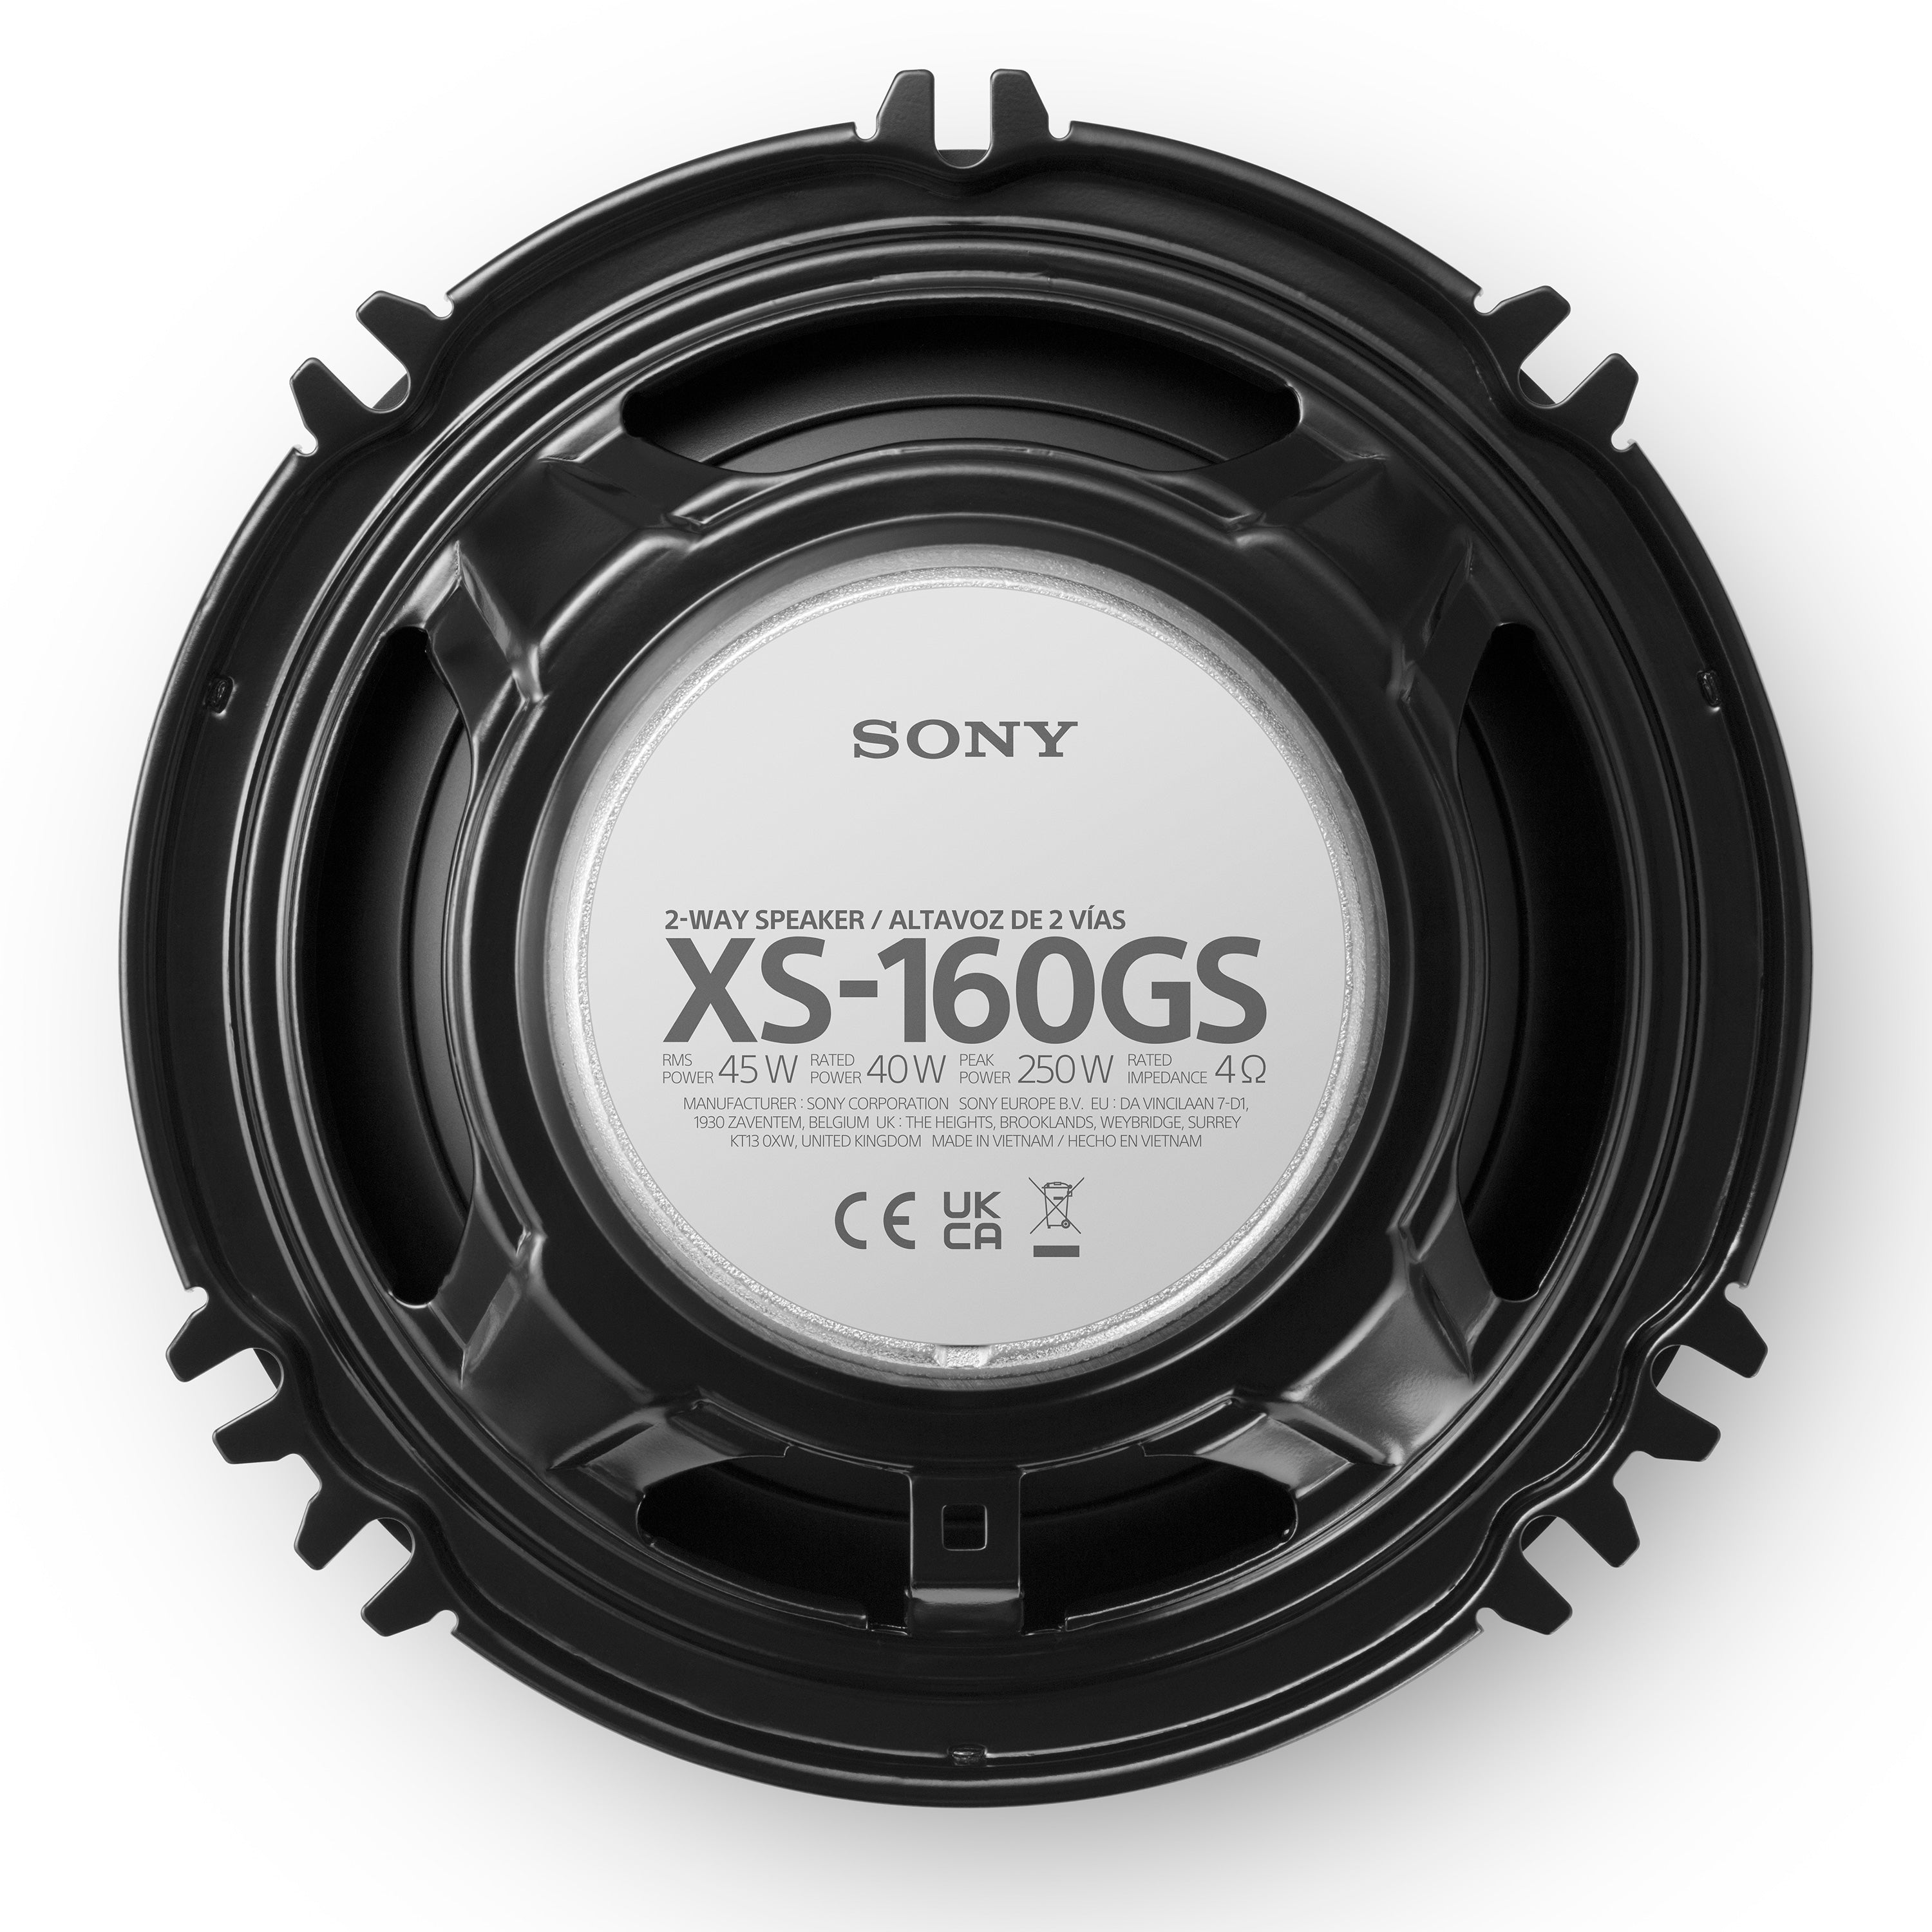 XS-160GS 6.5" 2-way Coaxial Speakers